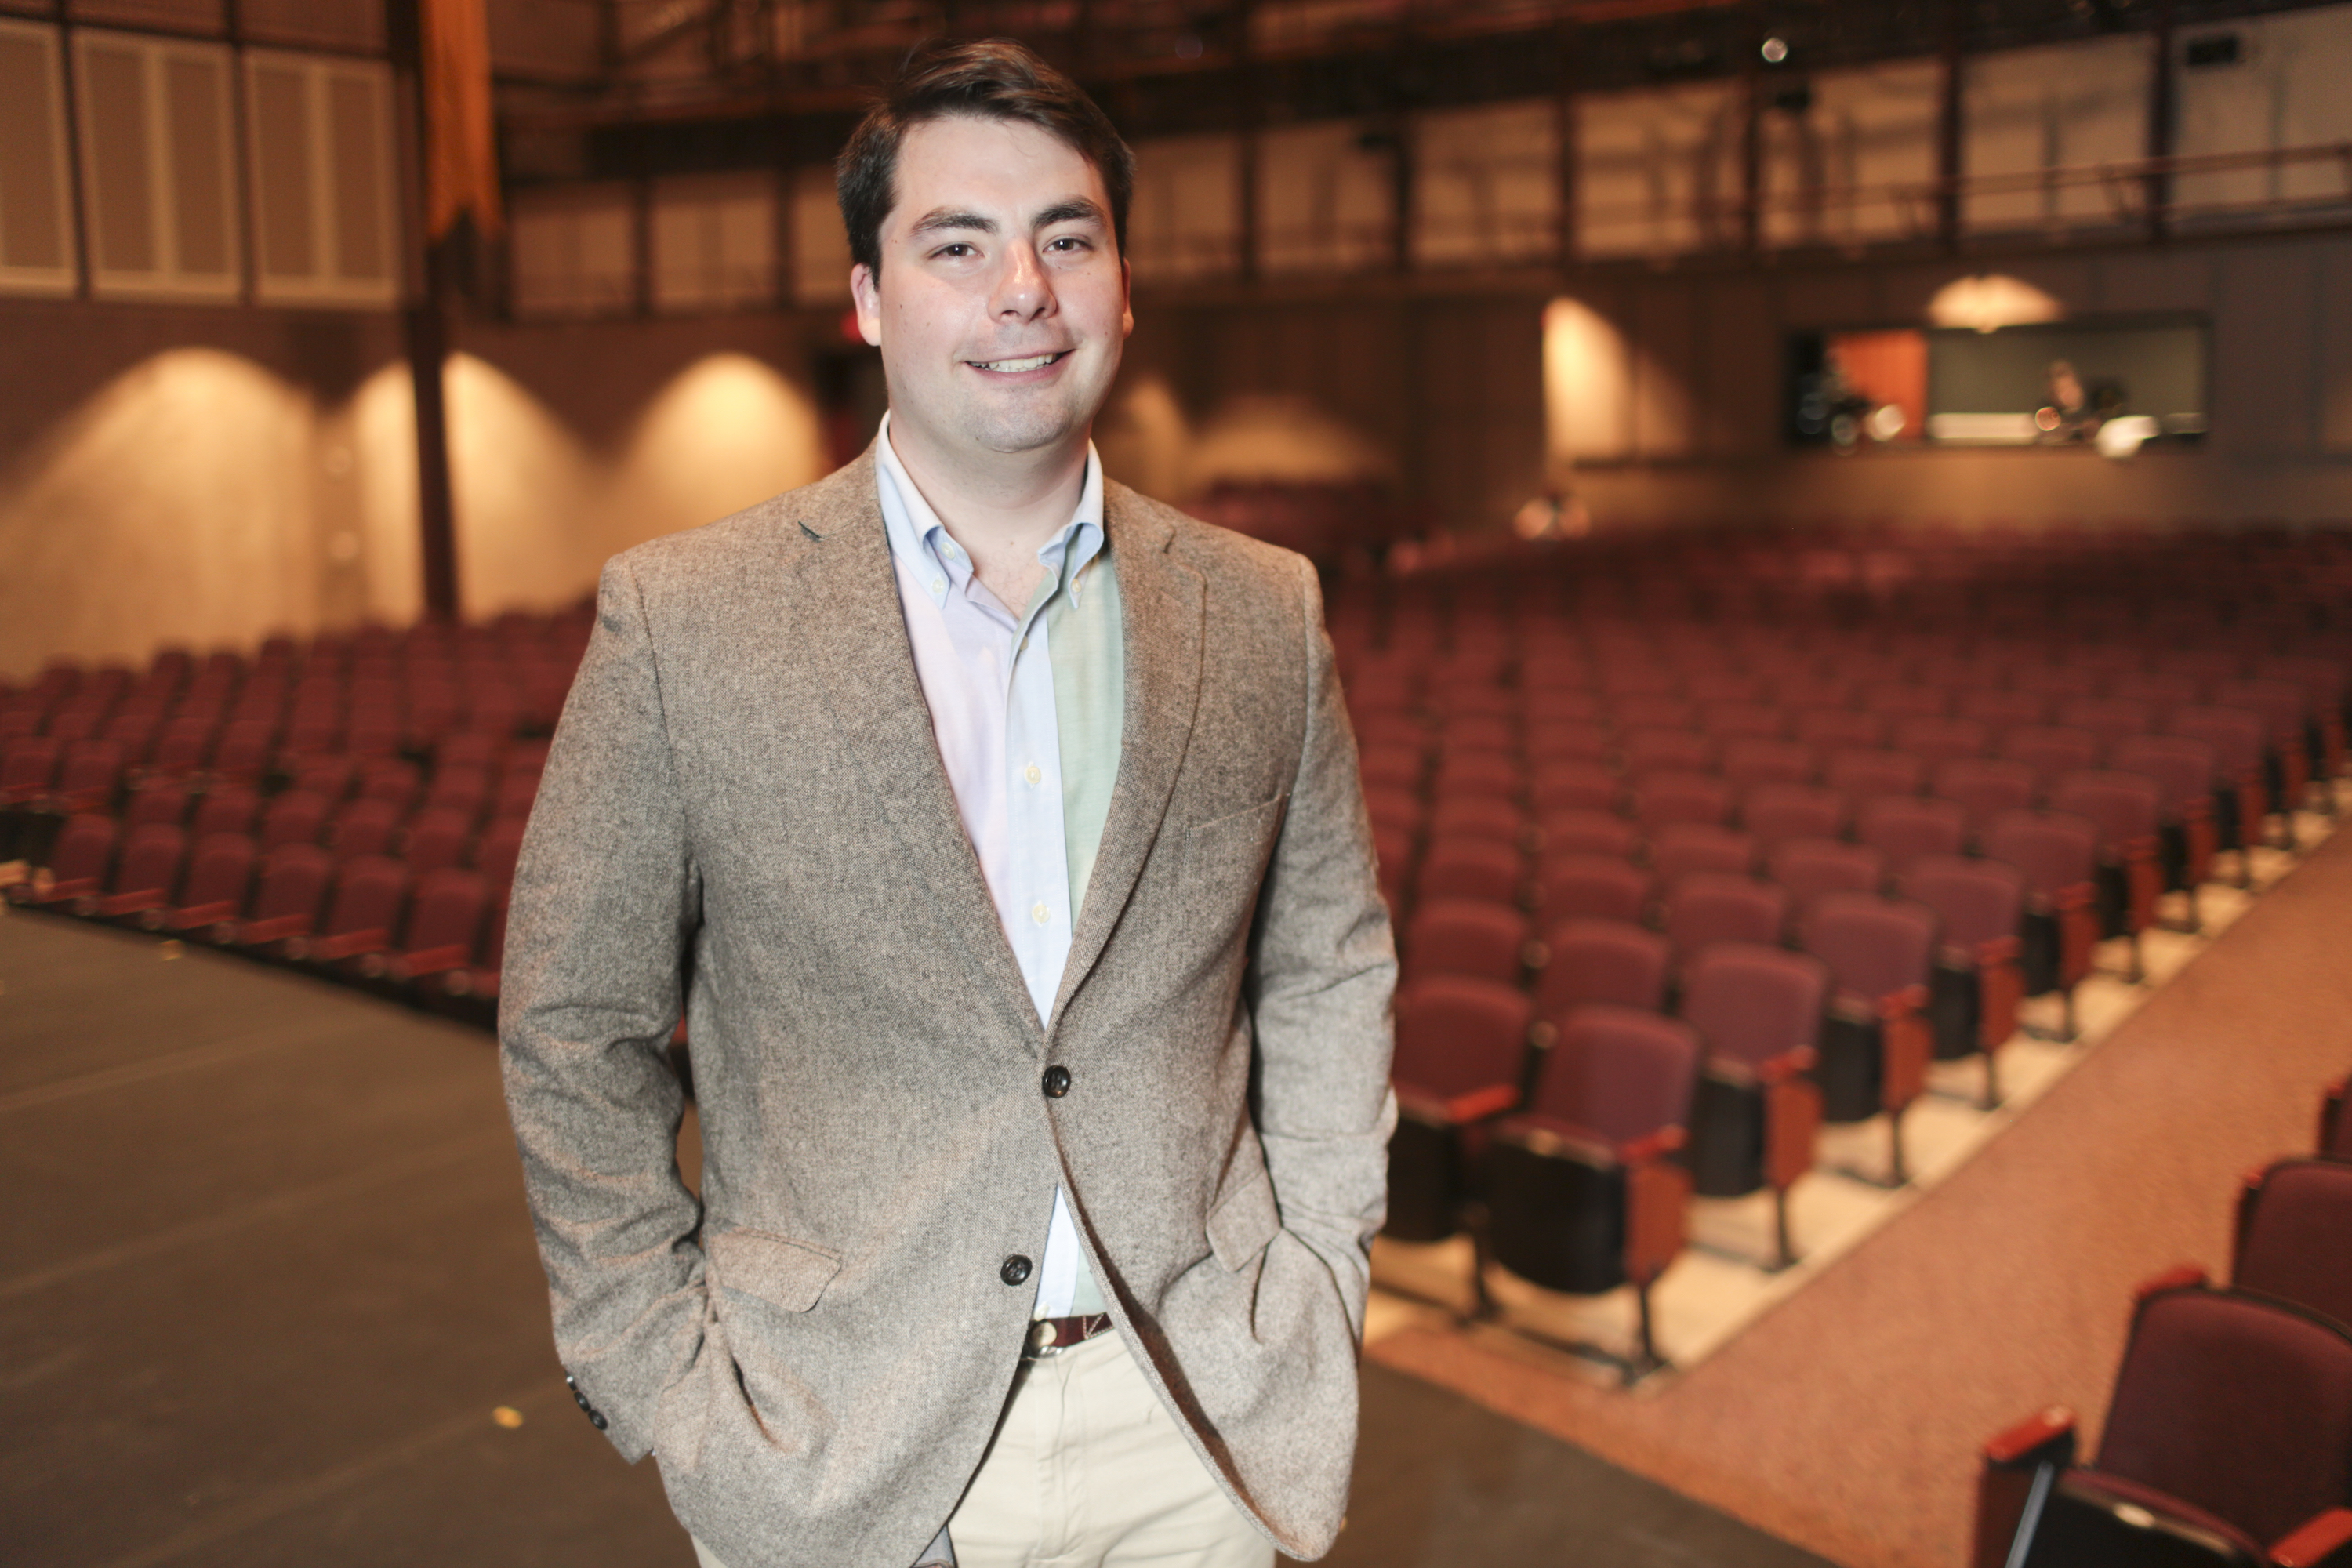 Michael Flynn, a 2010 graduate of the University and a 2006 graduate of Scranton Prep, founded the Scranton Shakespeare Festival six years ago. He now serves as artistic director for the festival.